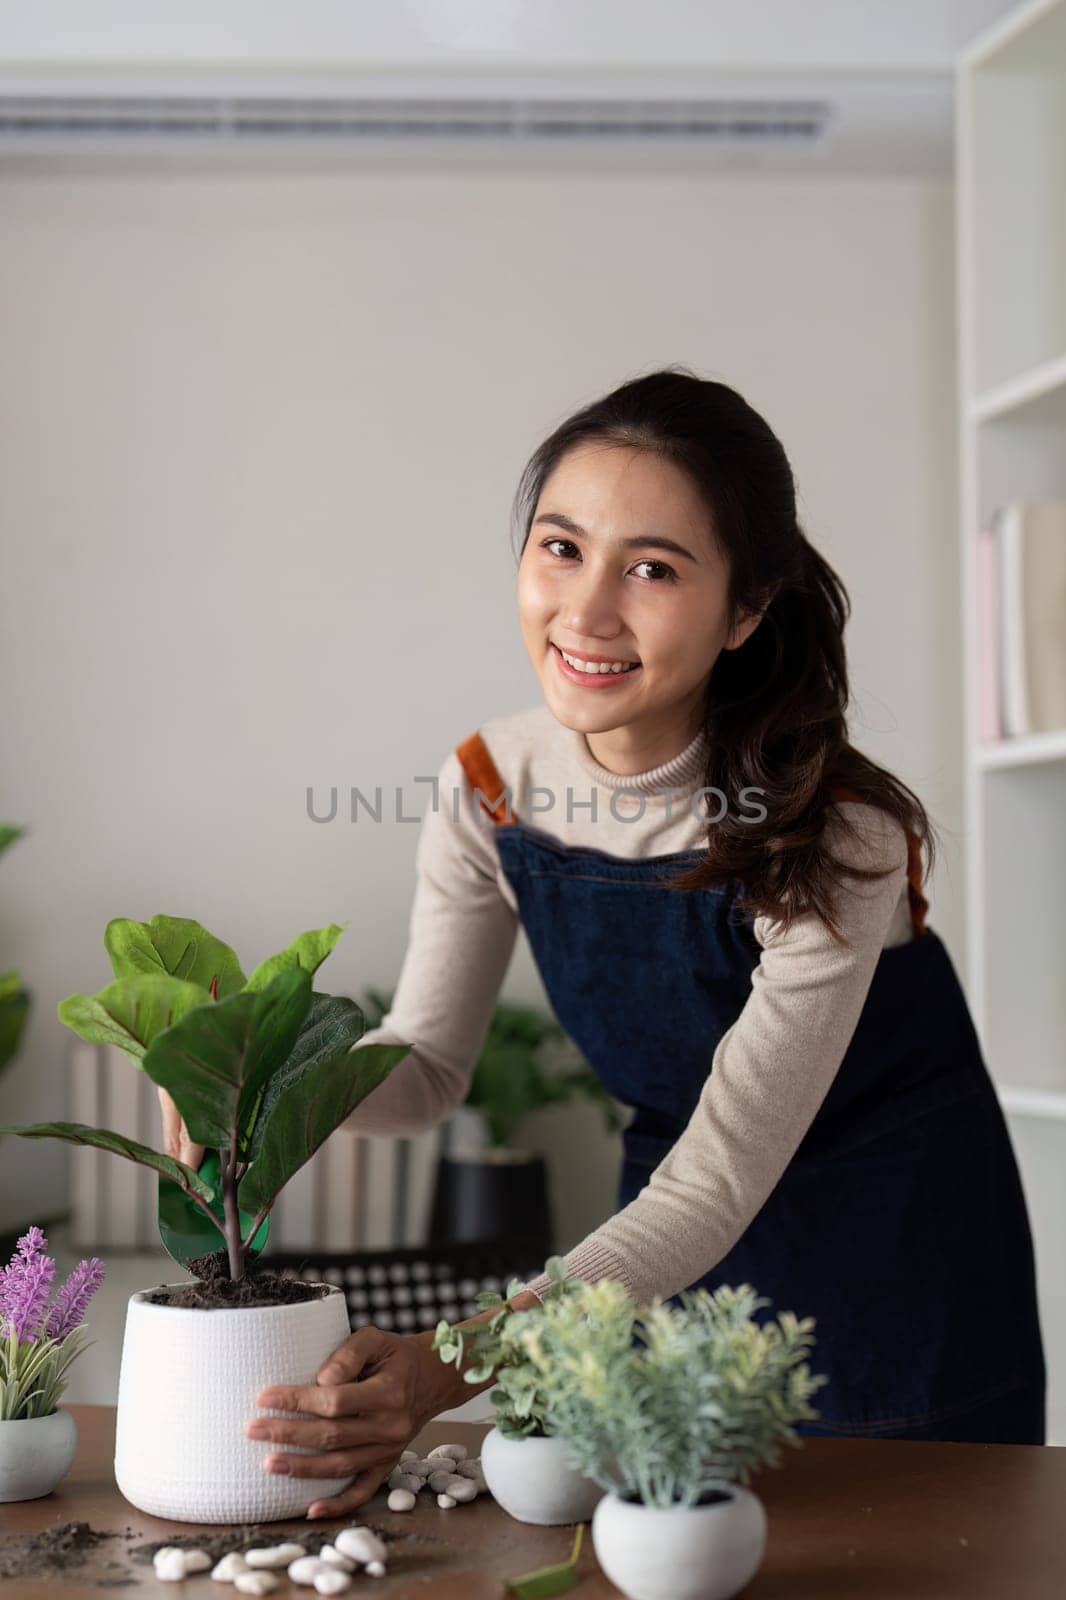 The concept of eco friendly housing, plant care and gardening. Preparing garden. Relax home gardening. Gardener woman asian hand planting flower in pot. Smiling woman takes care of plant by nateemee